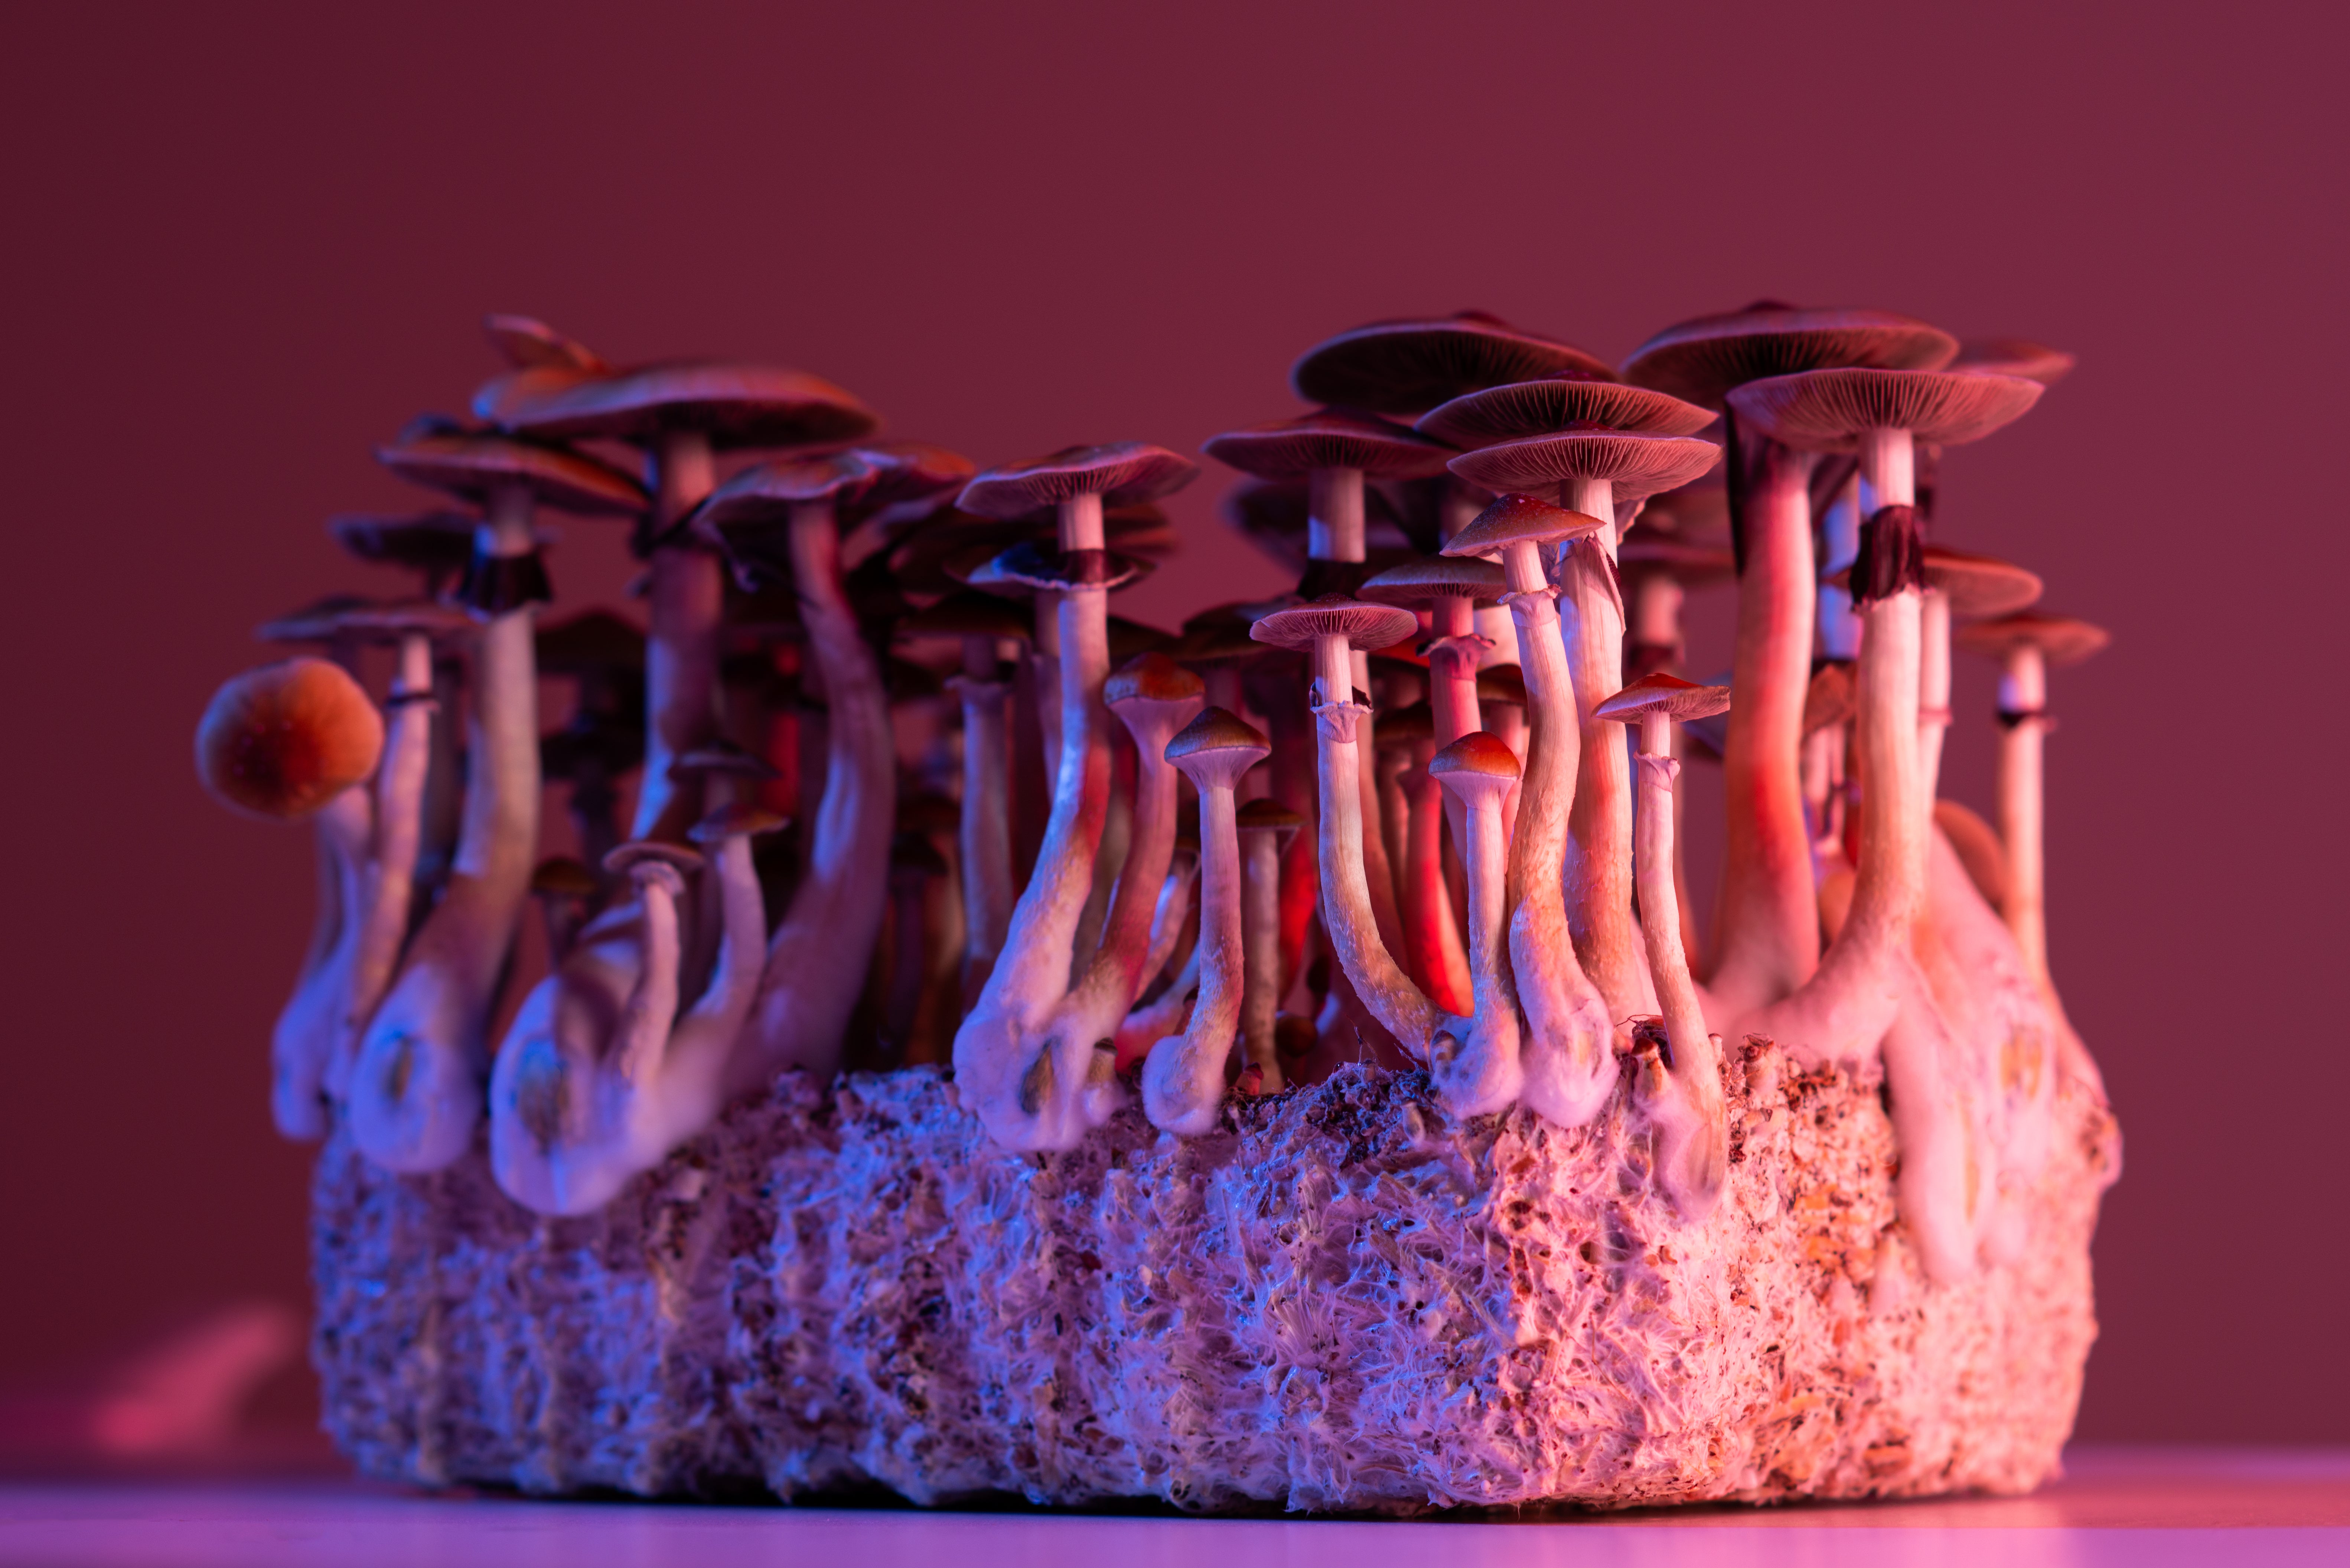 Psilocybin, the active compound in magic mushrooms, may be at least as effective as a leading antidepressant medication